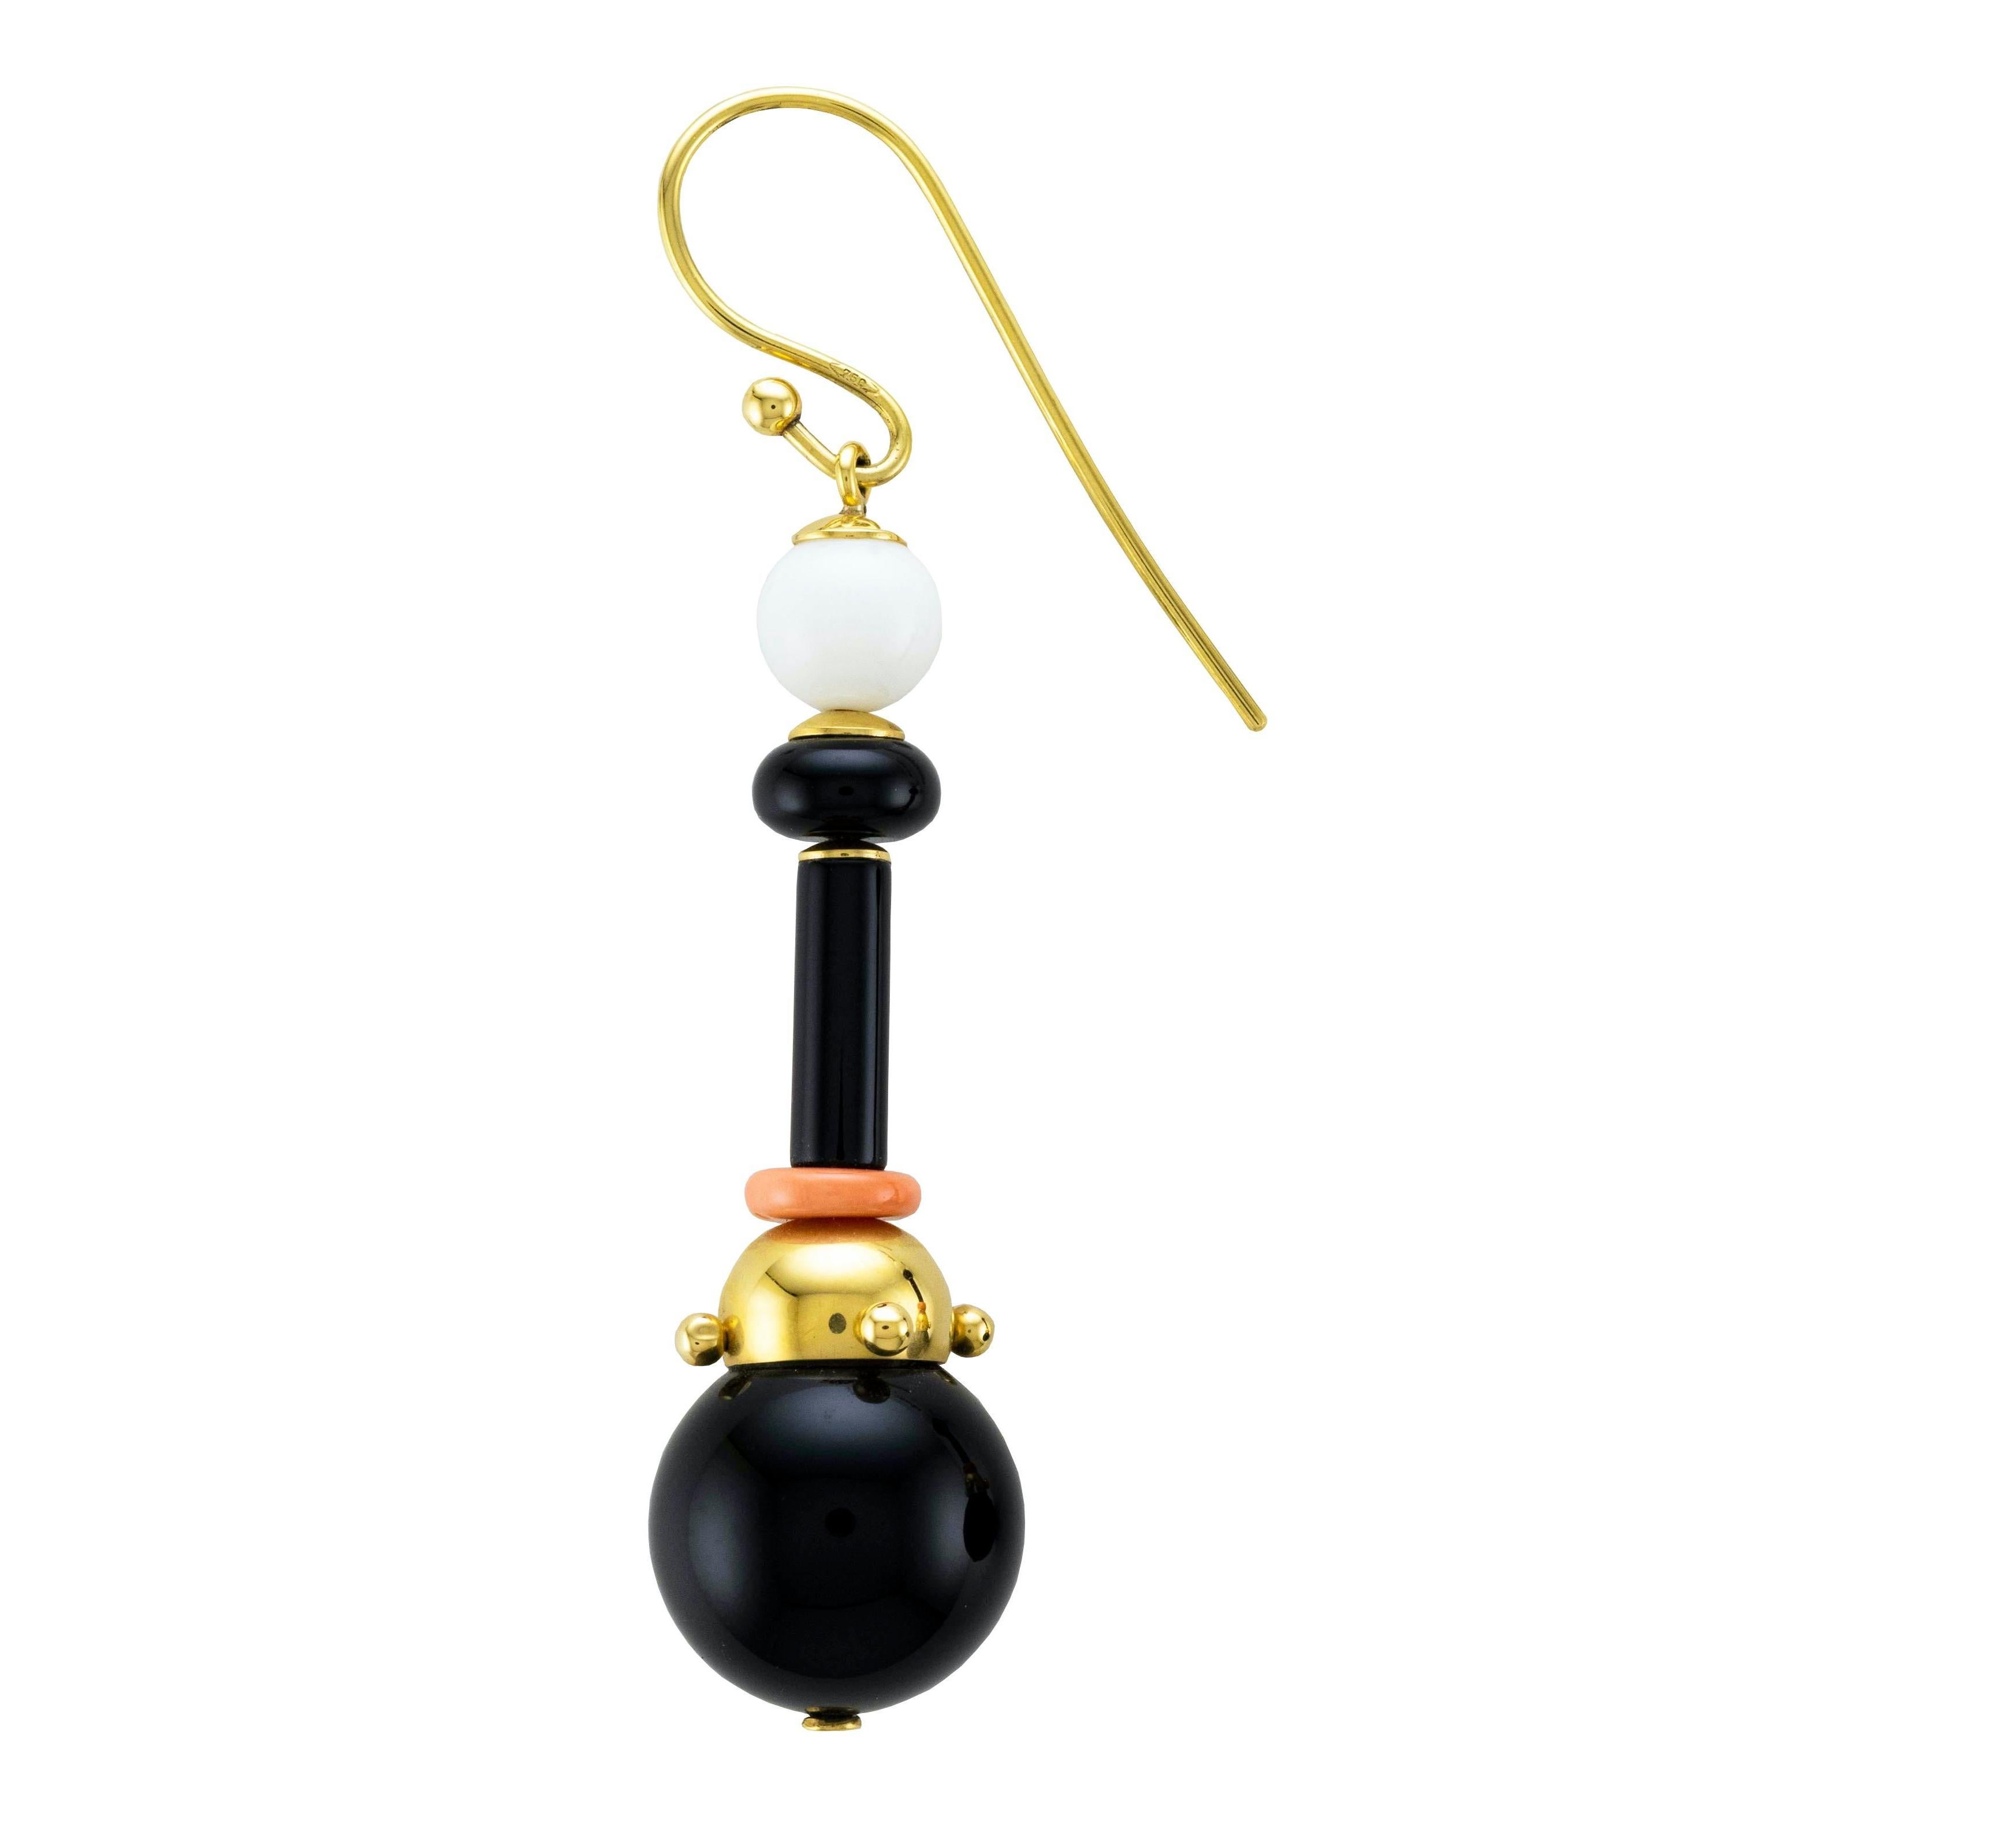 Mediterranean-inspired 18 Karat yellow gold dangle earrings made in Onyx and white Agate spheres.
Embellished with Mediterranean coral discs.
Total heights cm 7.00
Available also in Turquoise.
Handmade in Italy in Torre del Greco, a place well known